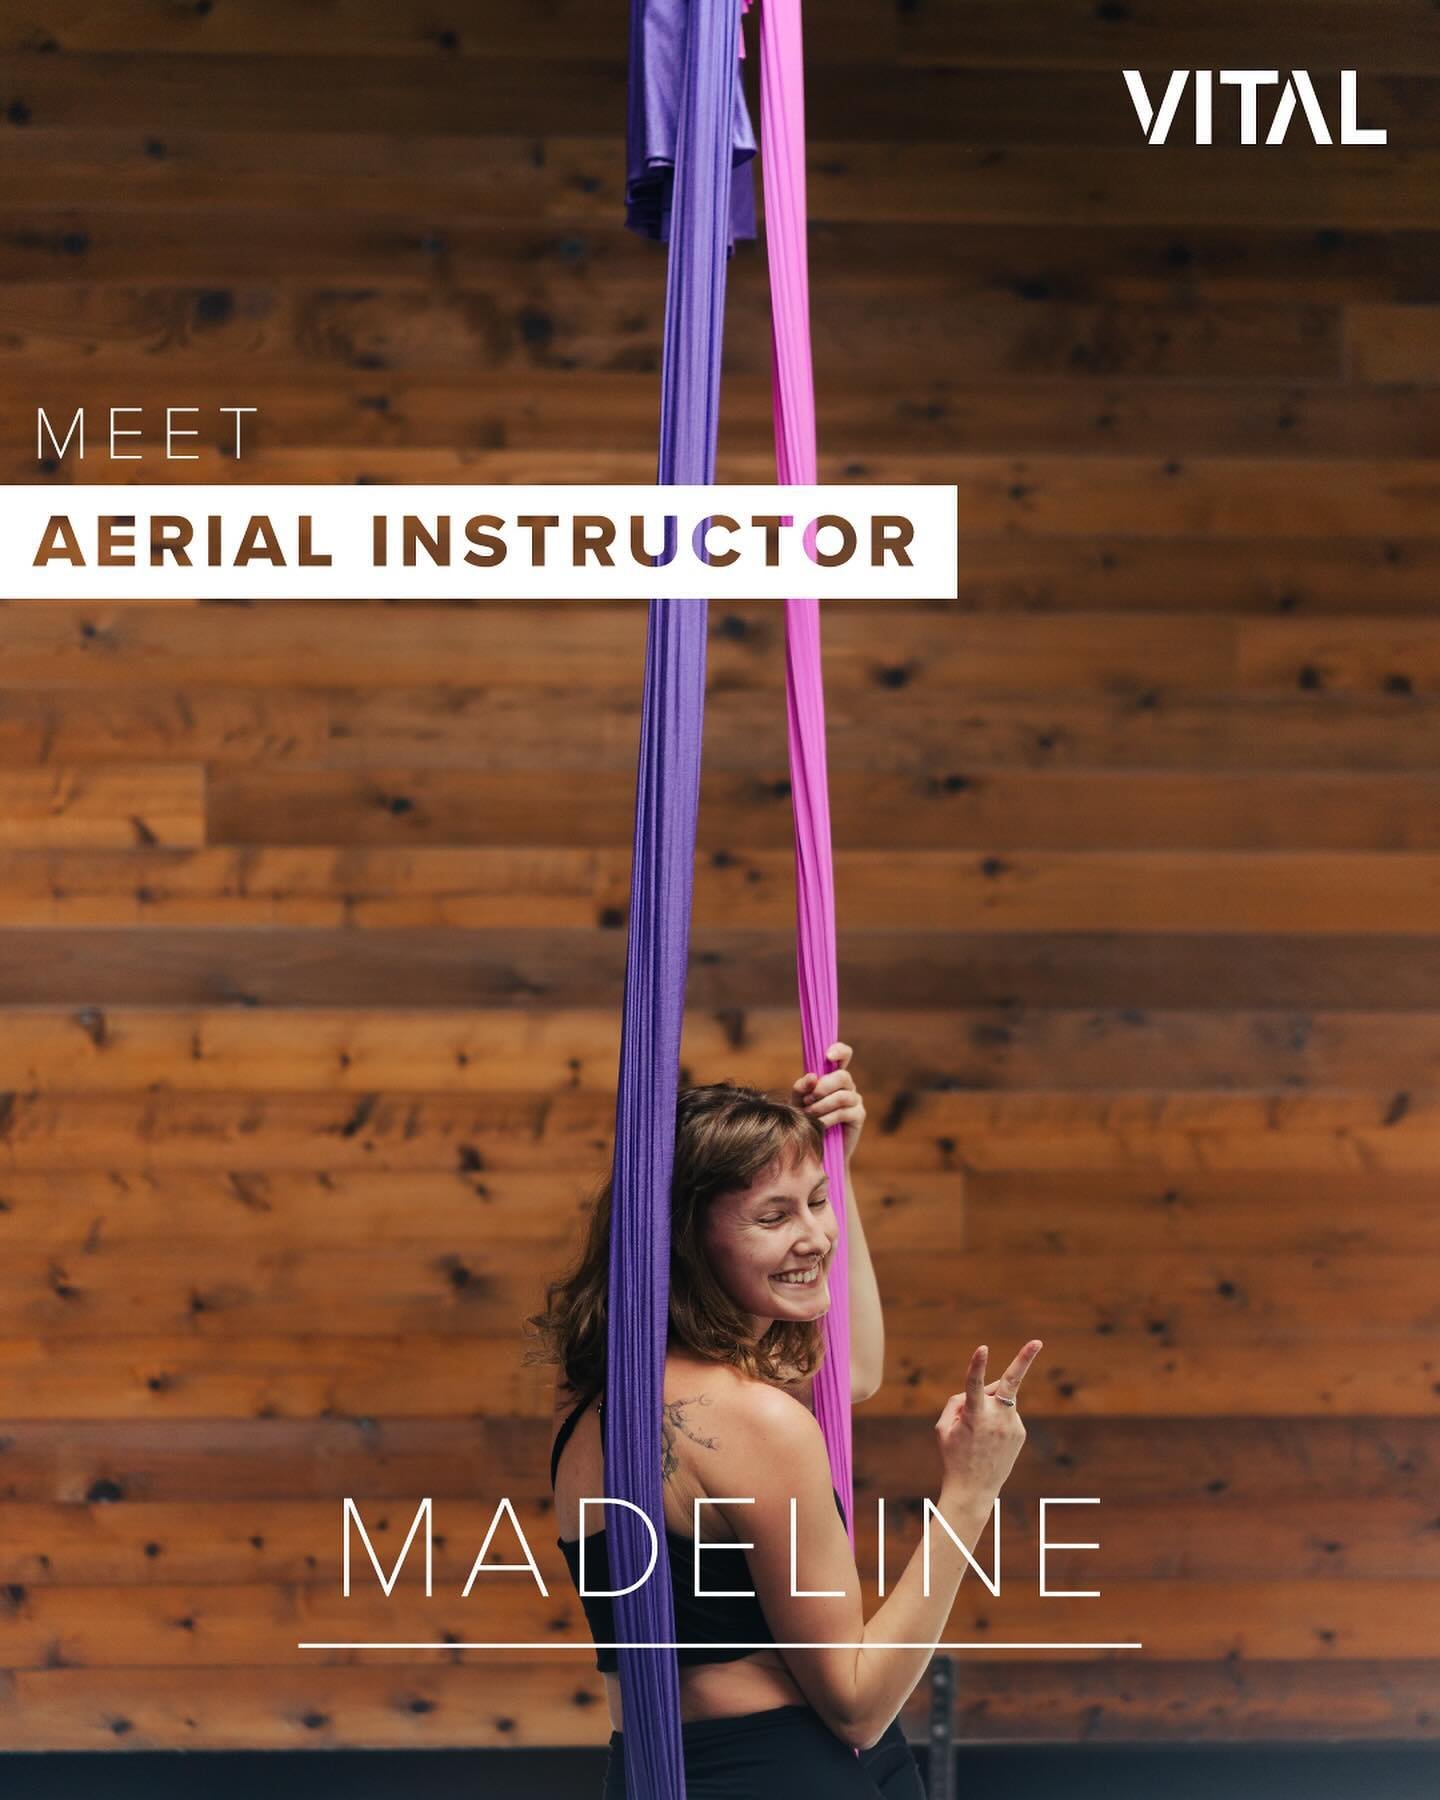 VITAL Instructor Spotlight 🌟

Meet VITAL Oceanside Aerial Instructor, Madeline! 

&ldquo;Hey there, I&rsquo;m Madeline! I came up as an aerialist here at VITAL and have been practicing since 2018. 

My background is all contact sports so my coaching